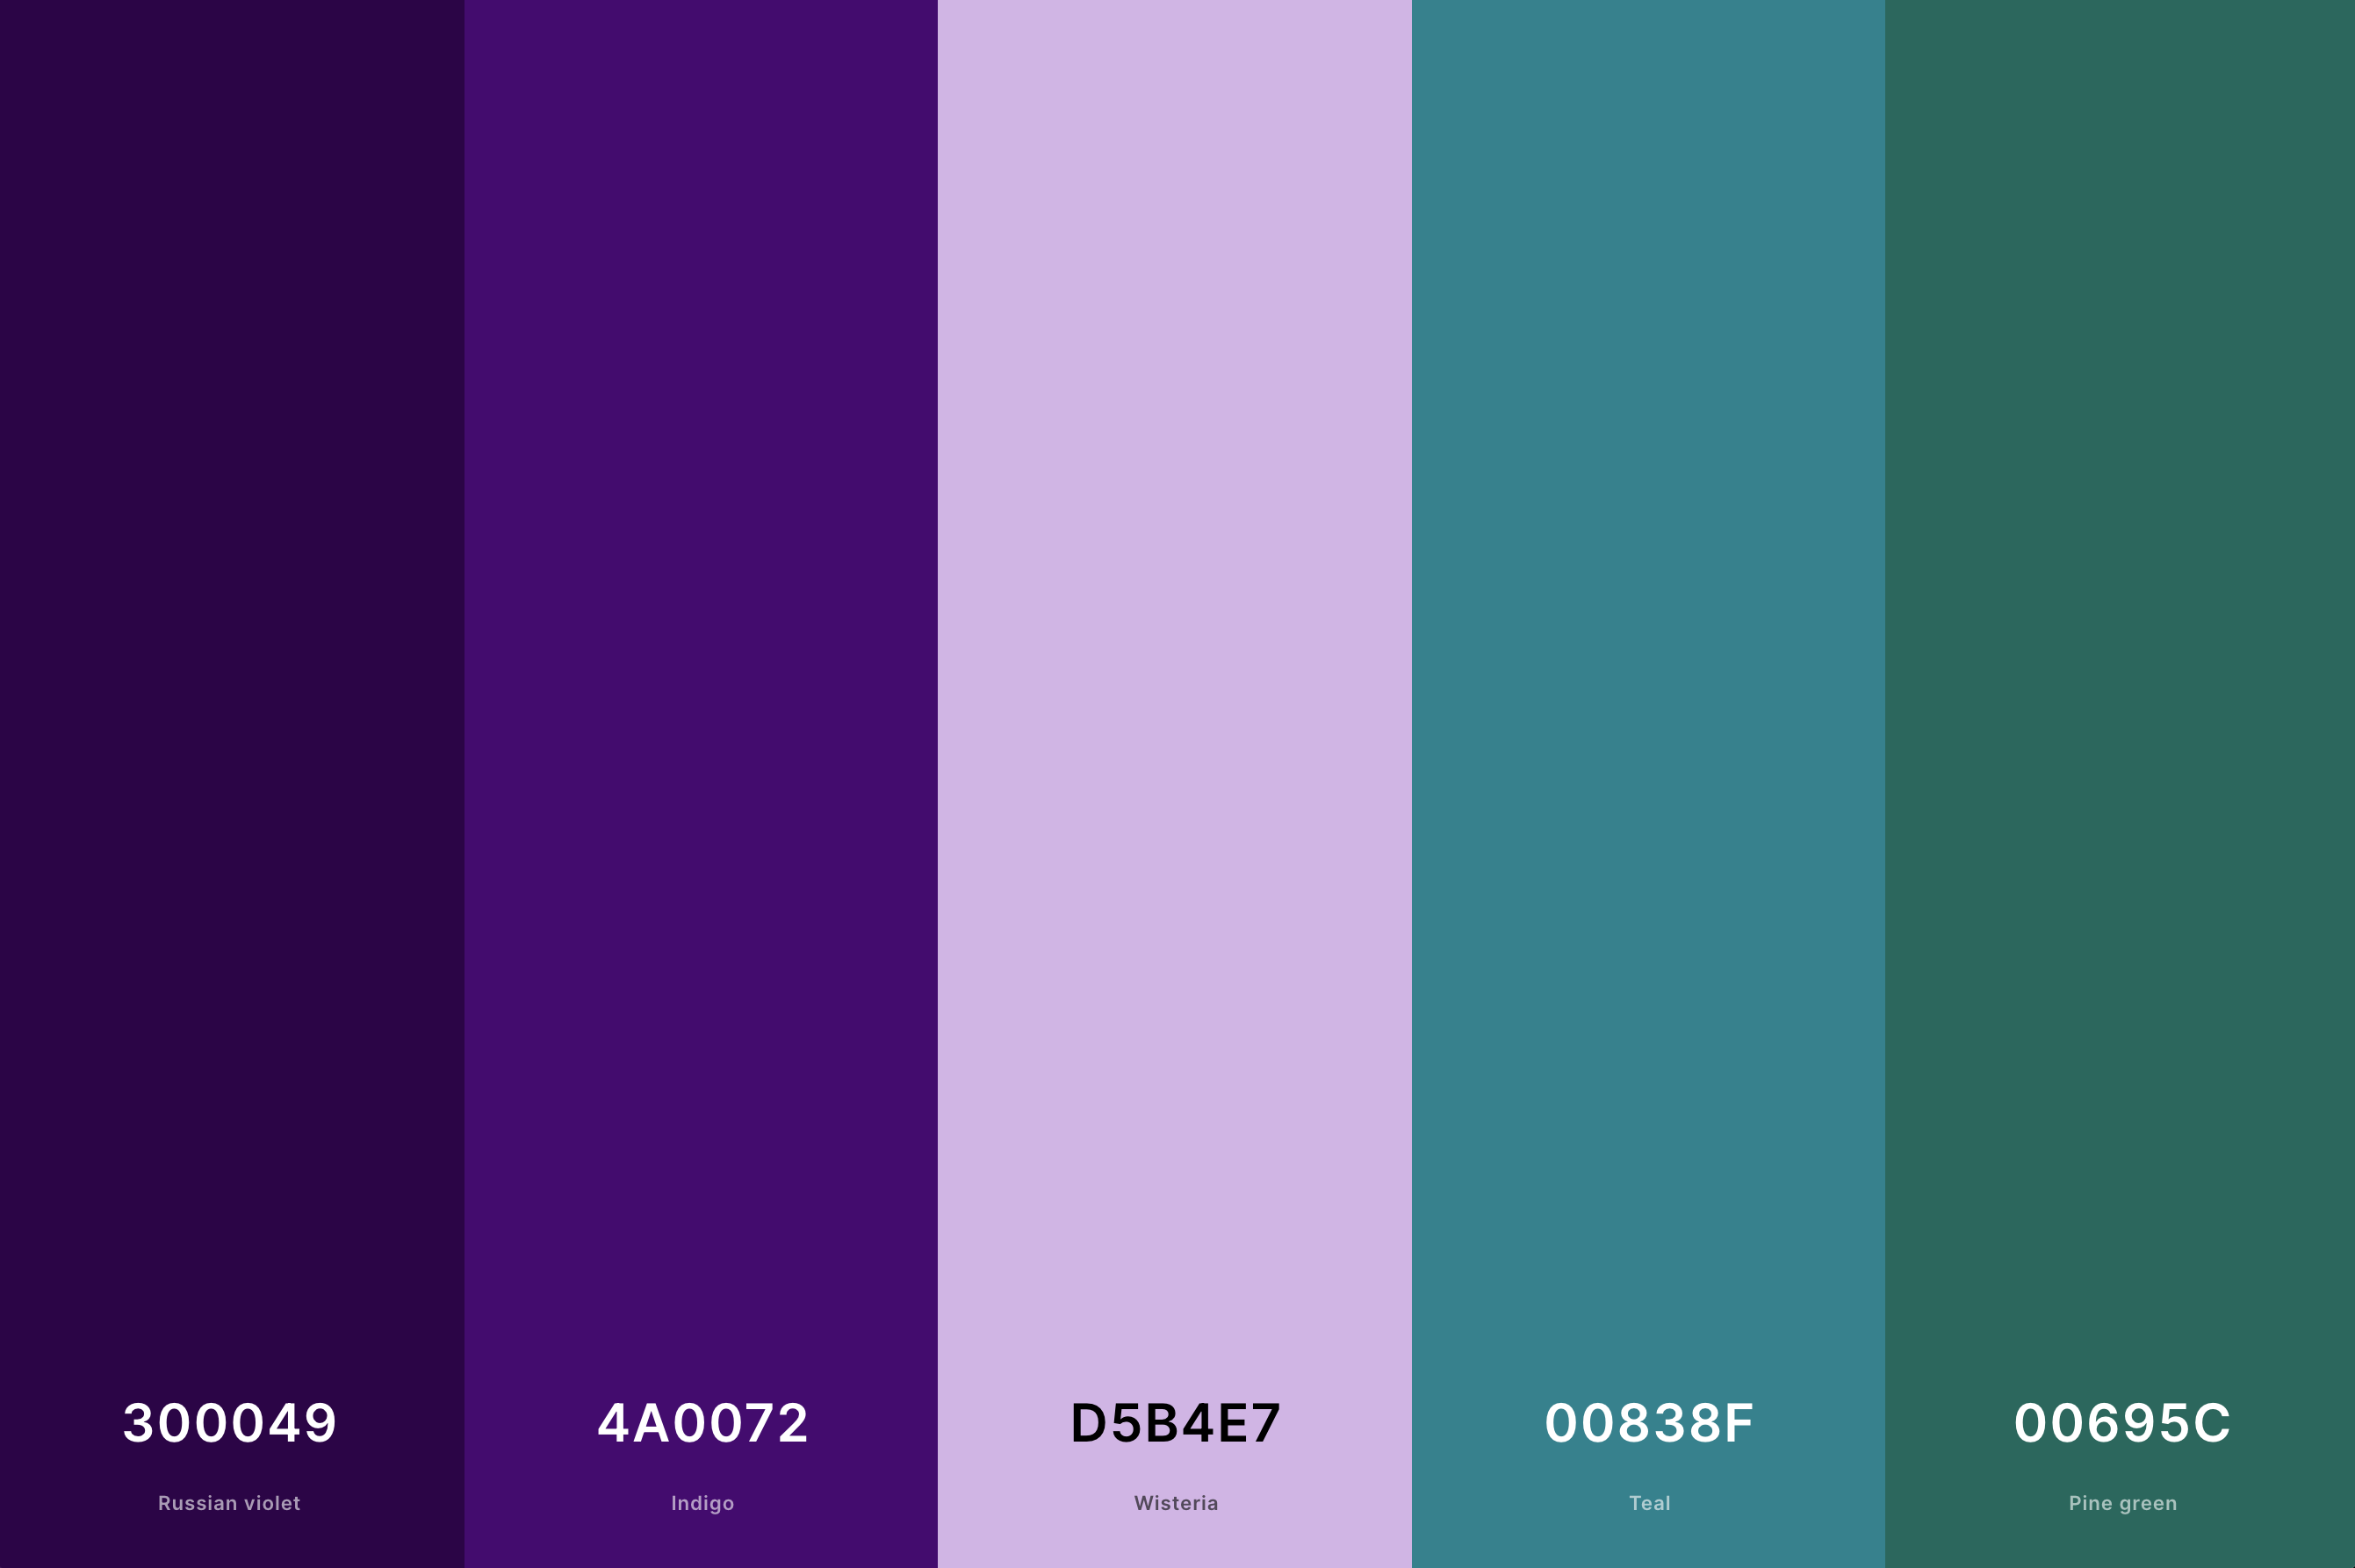 8. Purple And Teal Color Palette Color Palette with Russian Violet (Hex #300049) + Indigo (Hex #4A0072) + Wisteria (Hex #D5B4E7) + Teal (Hex #00838F) + Pine Green (Hex #00695C) Color Palette with Hex Codes